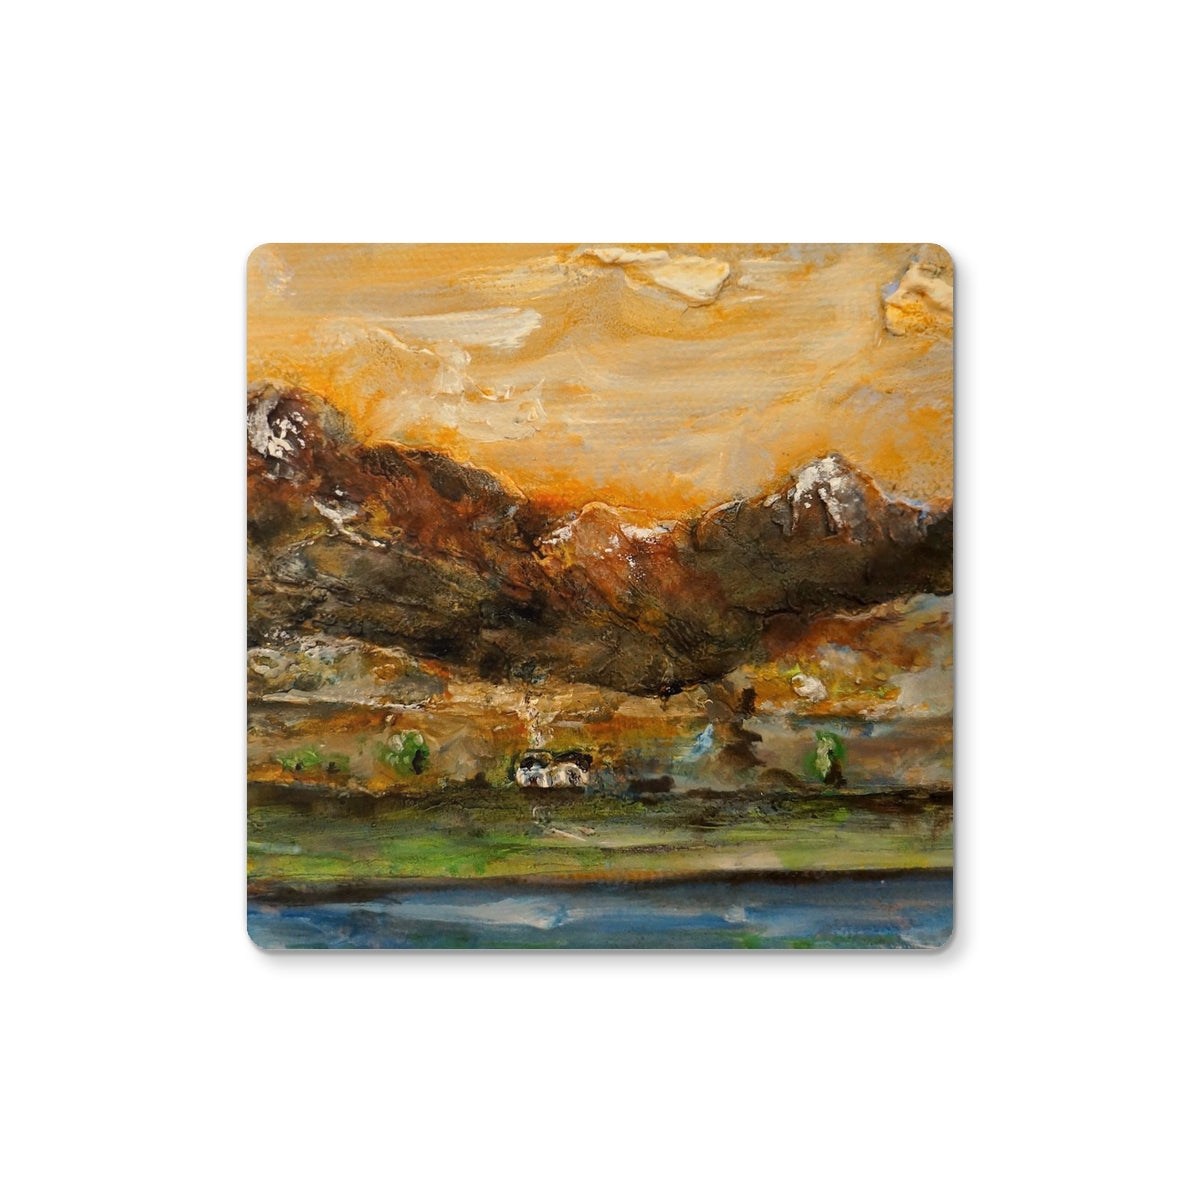 A Glencoe Cottage Art Gifts Coaster-Coasters-Glencoe Art Gallery-6 Coasters-Paintings, Prints, Homeware, Art Gifts From Scotland By Scottish Artist Kevin Hunter